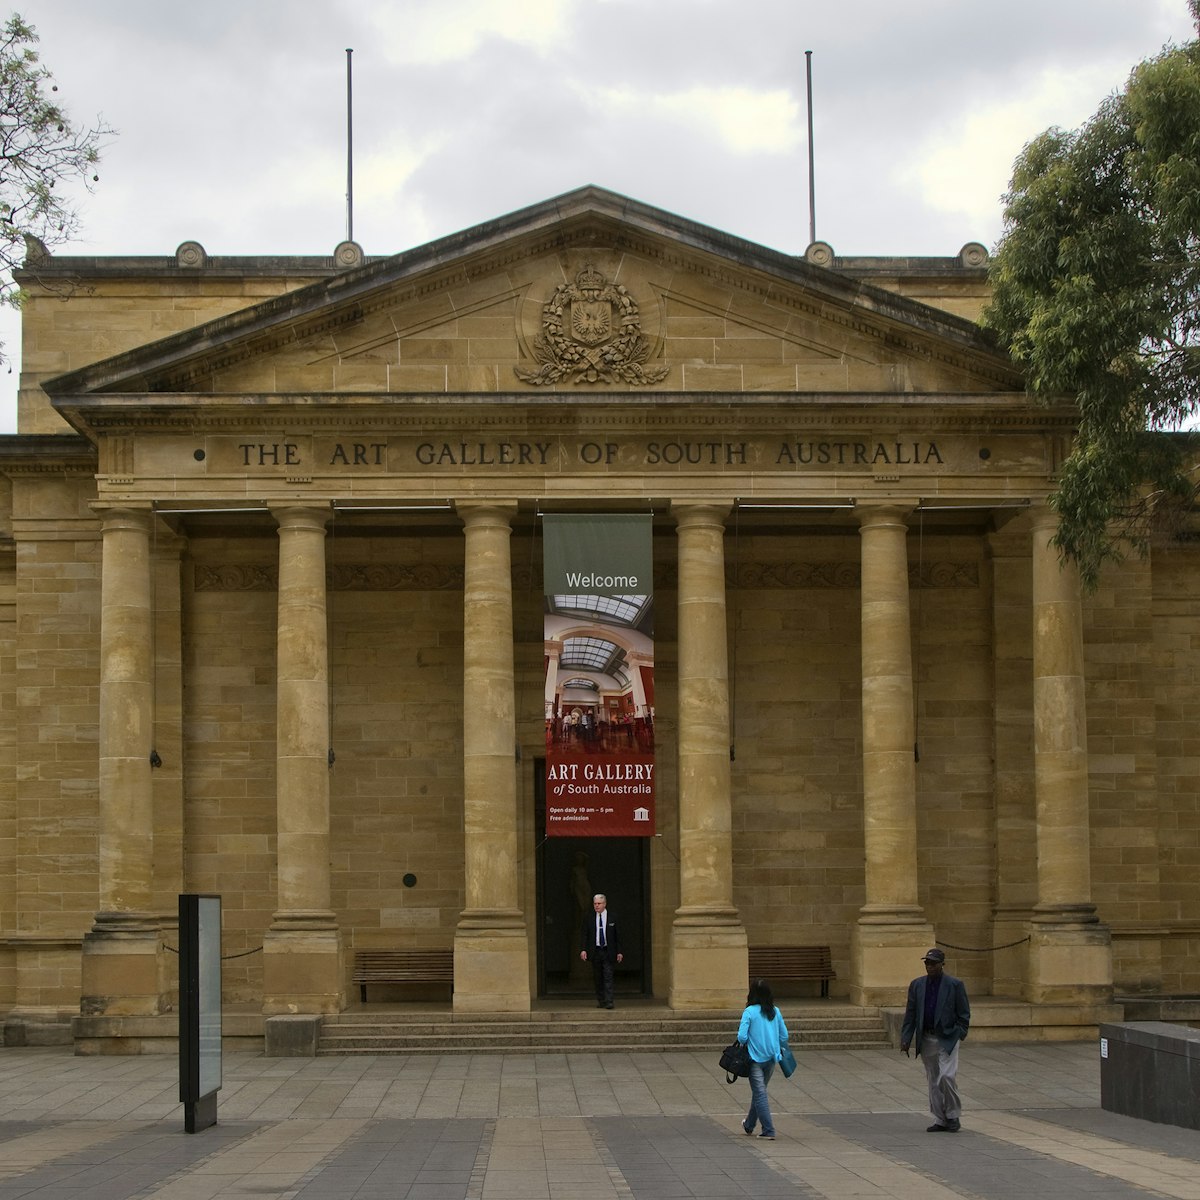 Front entrance (The Elder Wing) of the Art Gallery of South Australia.